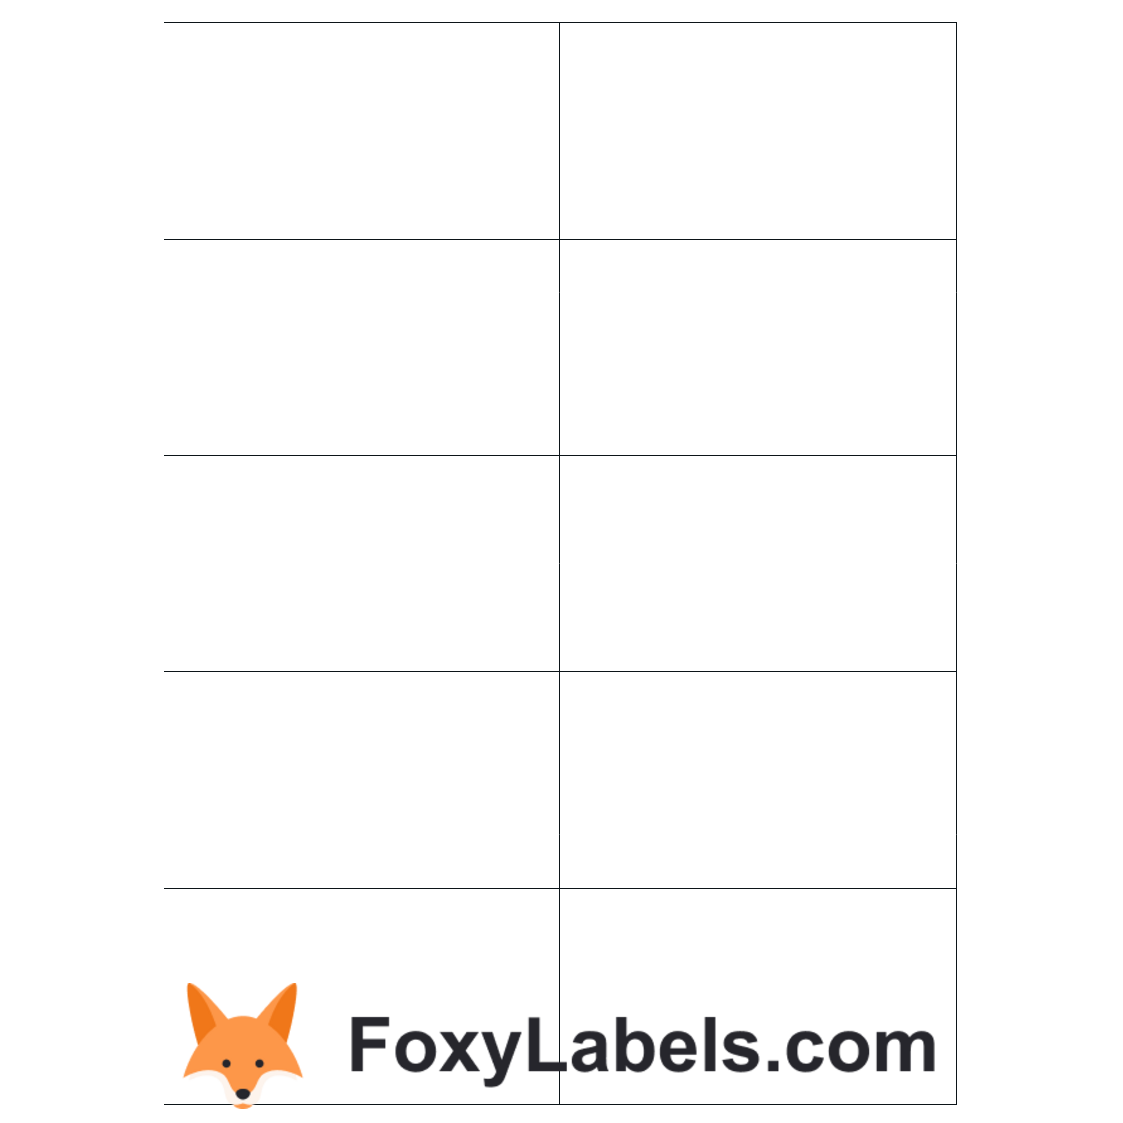 Avery® 3425 label template for Google Docs